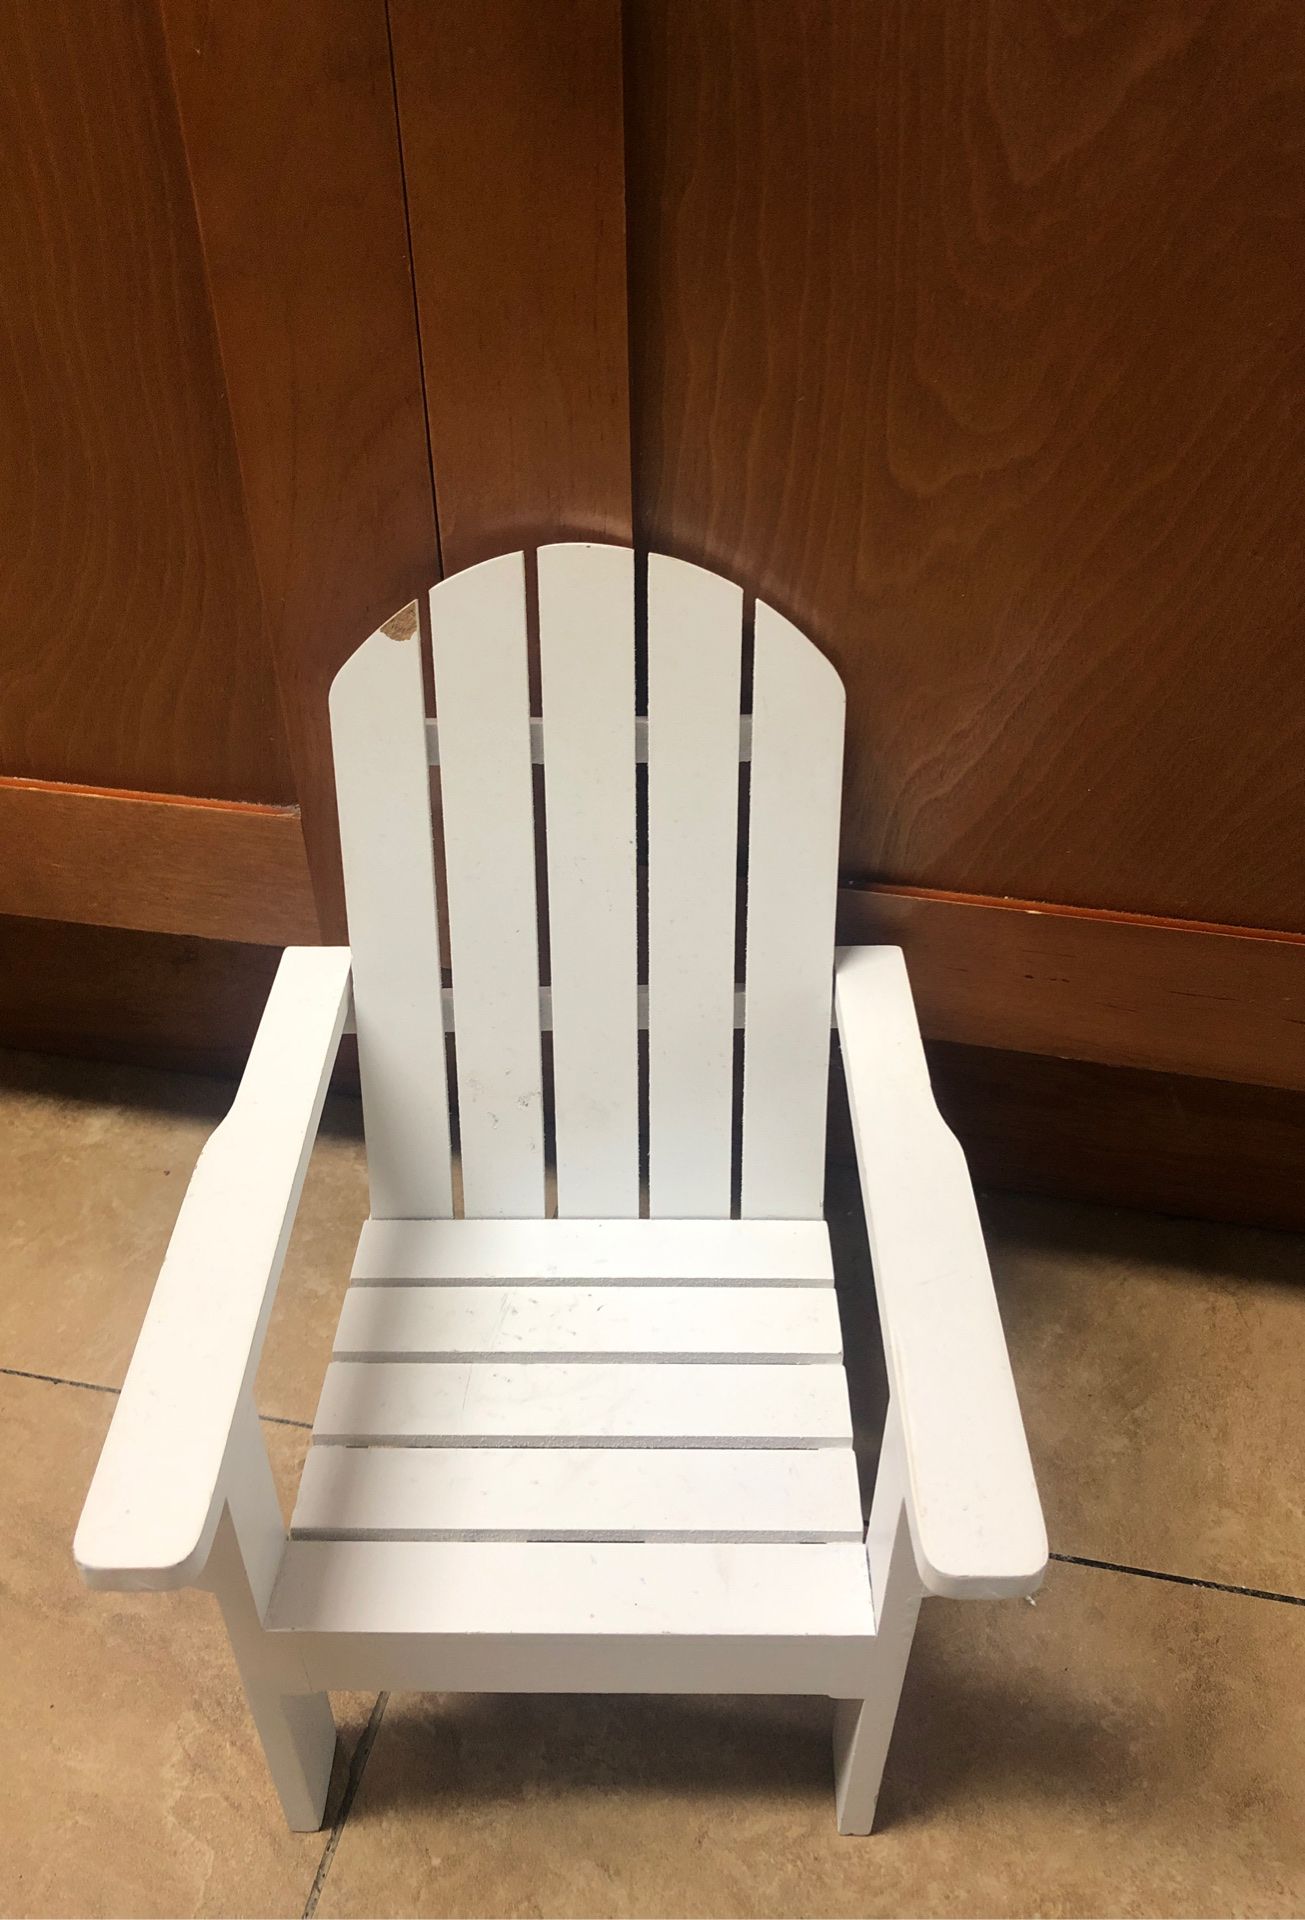 American Girl Doll Outdoor Chair